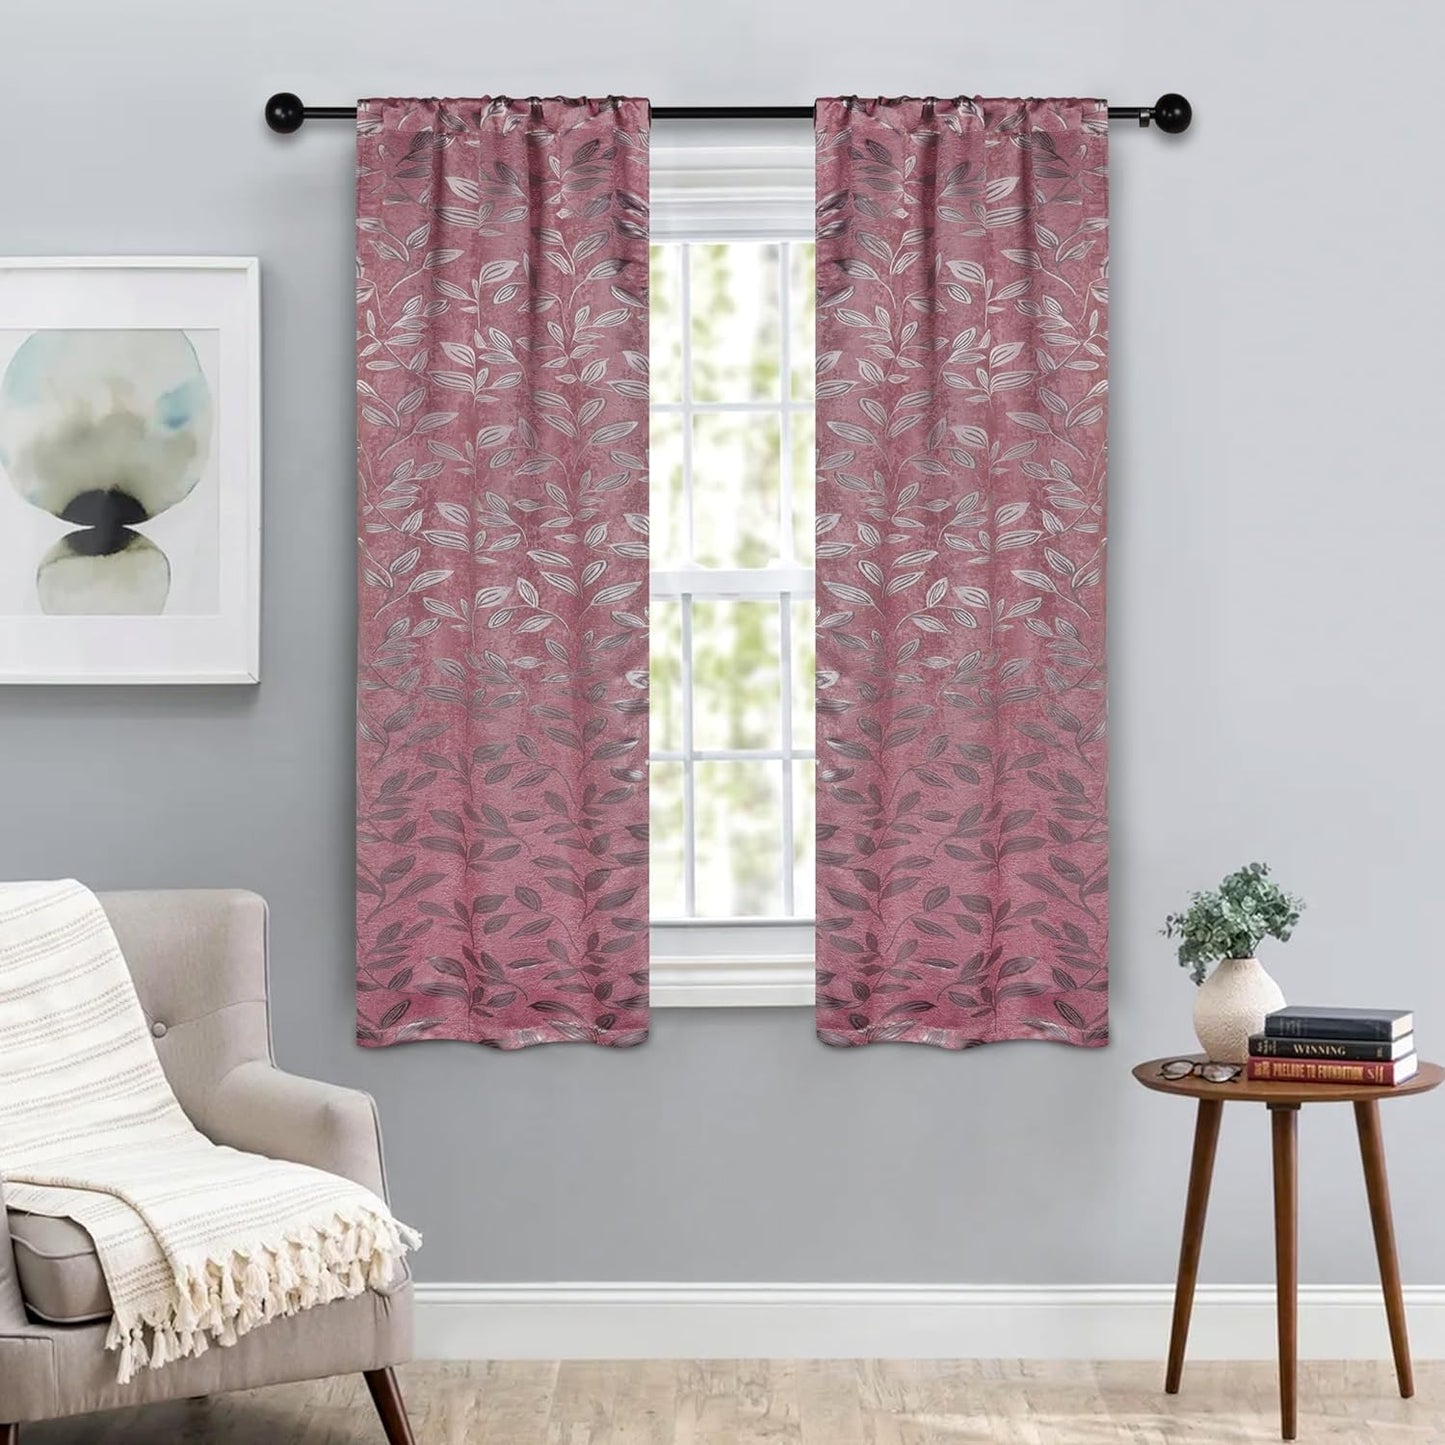 Superior Blackout Curtains, Room Darkening Window Accent for Bedroom, Sun Blocking, Thermal, Modern Bohemian Curtains, Leaves Collection, Set of 2 Panels, Rod Pocket - 52 in X 63 In, Nickel Black  Home City Inc. Blush 26 In X 63 In (W X L) 